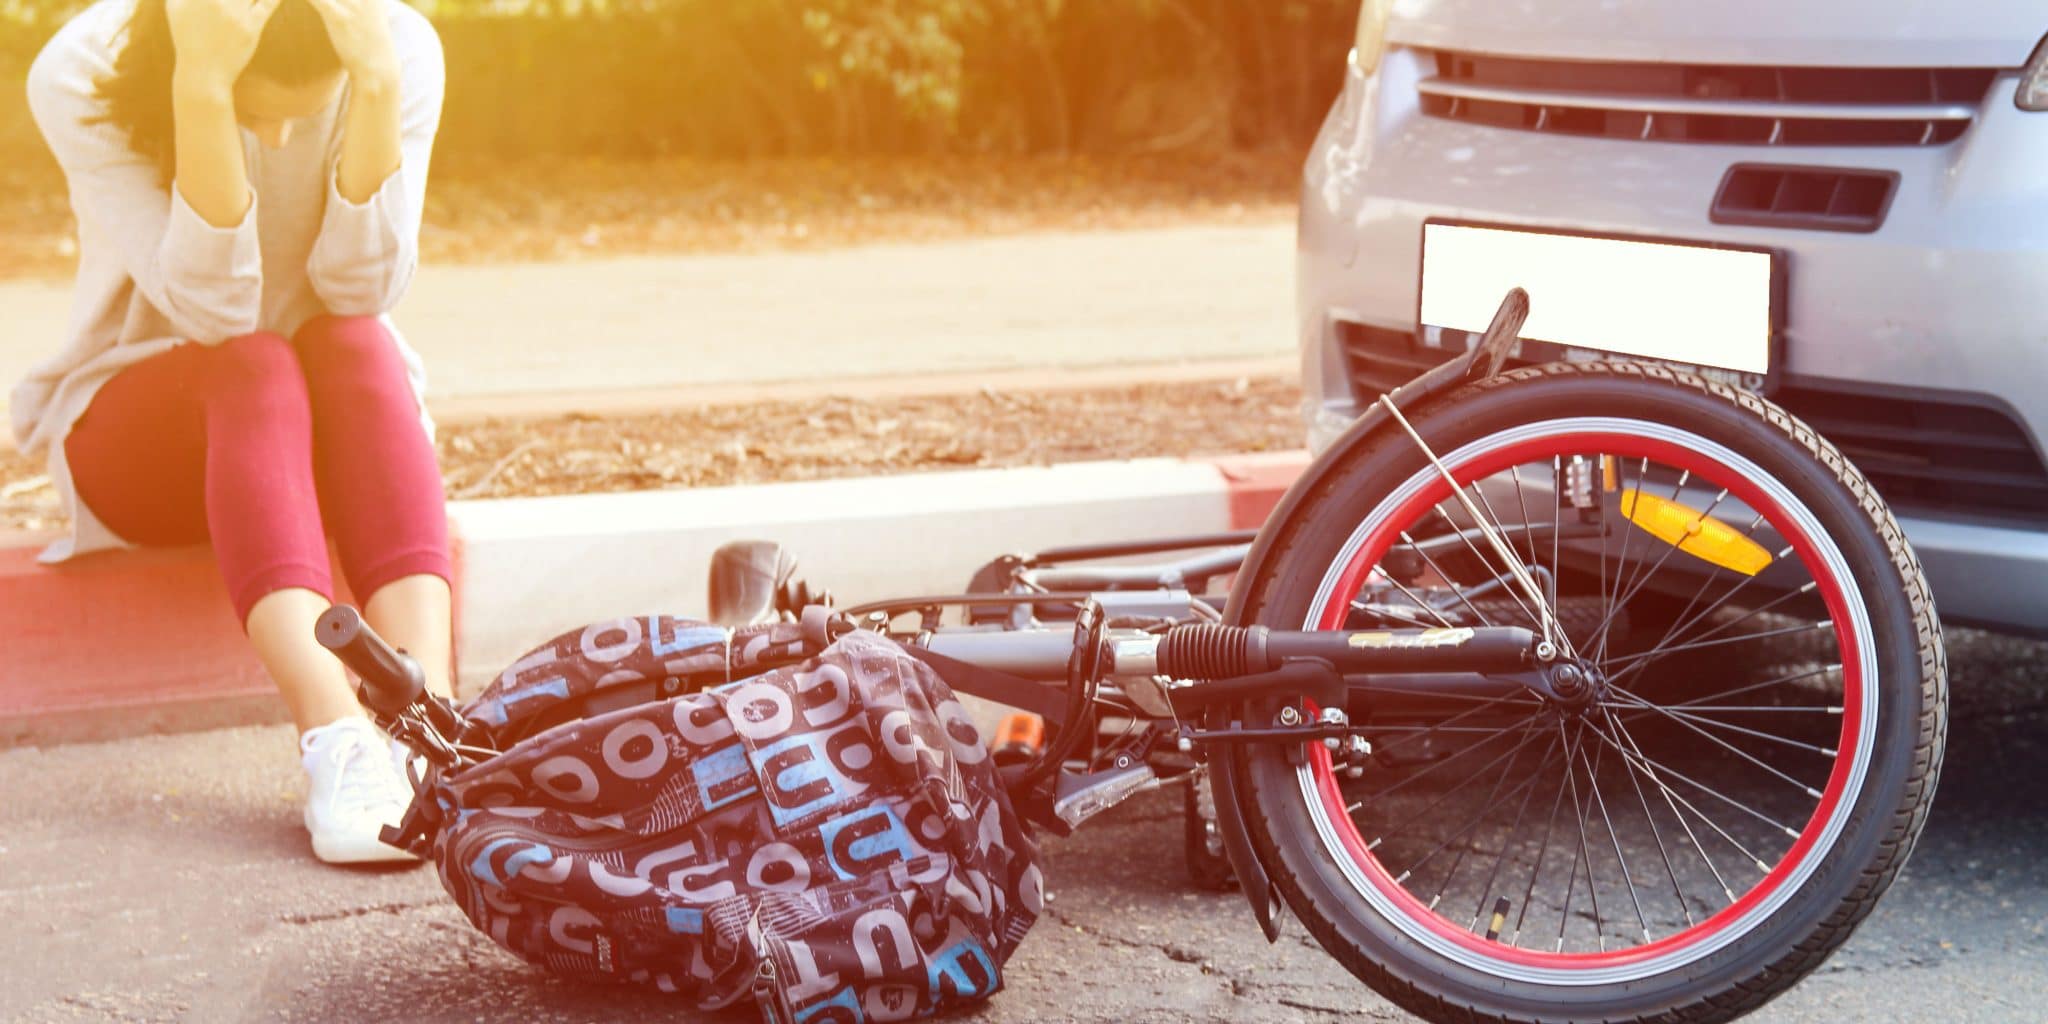 e-bike-accidents-in-california-ava-law-group-accident-attorneys